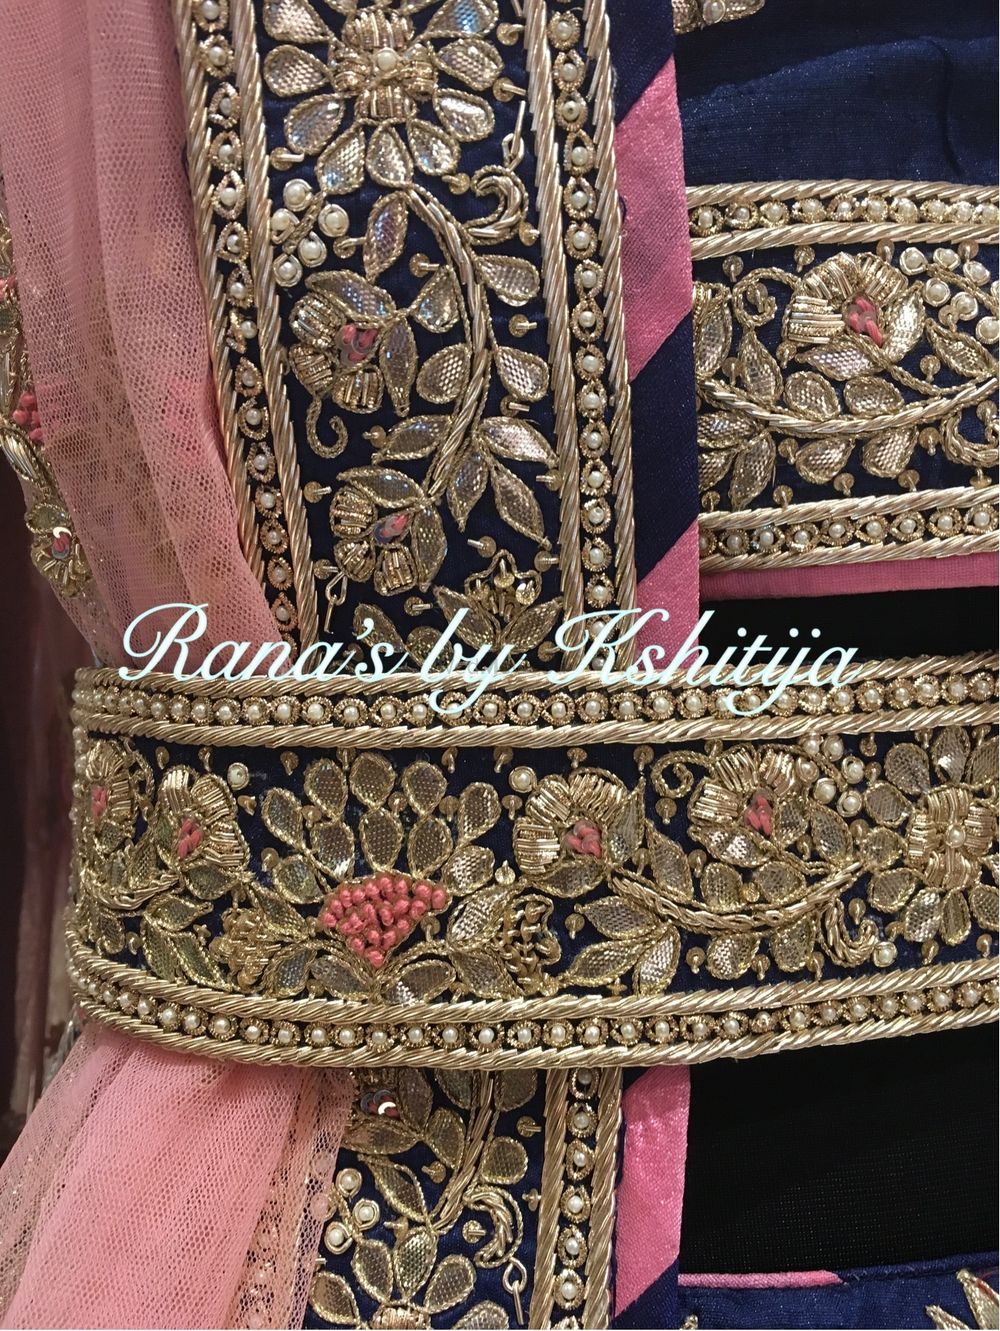 Photo From The Special Bridal Lehenga/Outfit Collection - By RANA'S by Kshitija